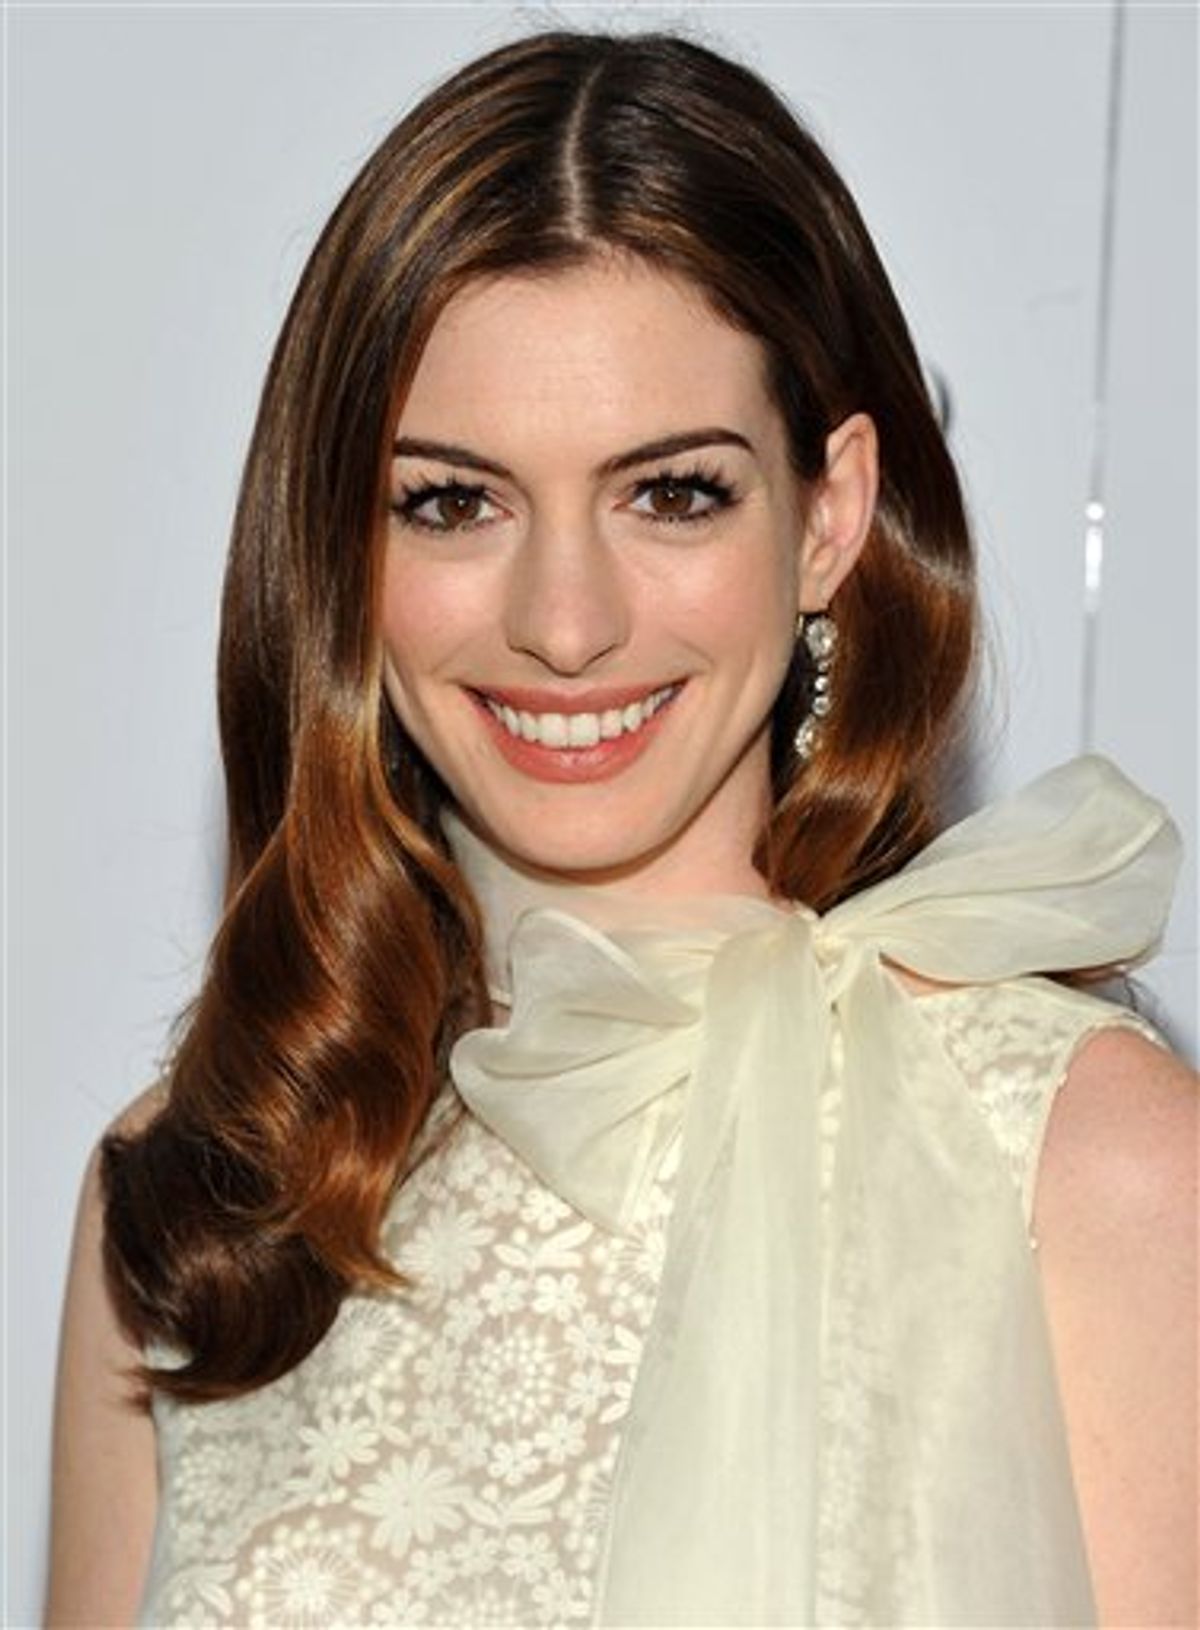 FILE - In this Nov. 16, 2010 file photo, actress Anne Hathaway attends the premiere of "Love and Other Drugs" at the Directors Guild Theater in New York. Hathaway and actor James Franco will serve as co-hosts of the 83rd Academy Awards on Feb. 27, 2011. (AP Photo/Evan Agostini, file)  (AP)